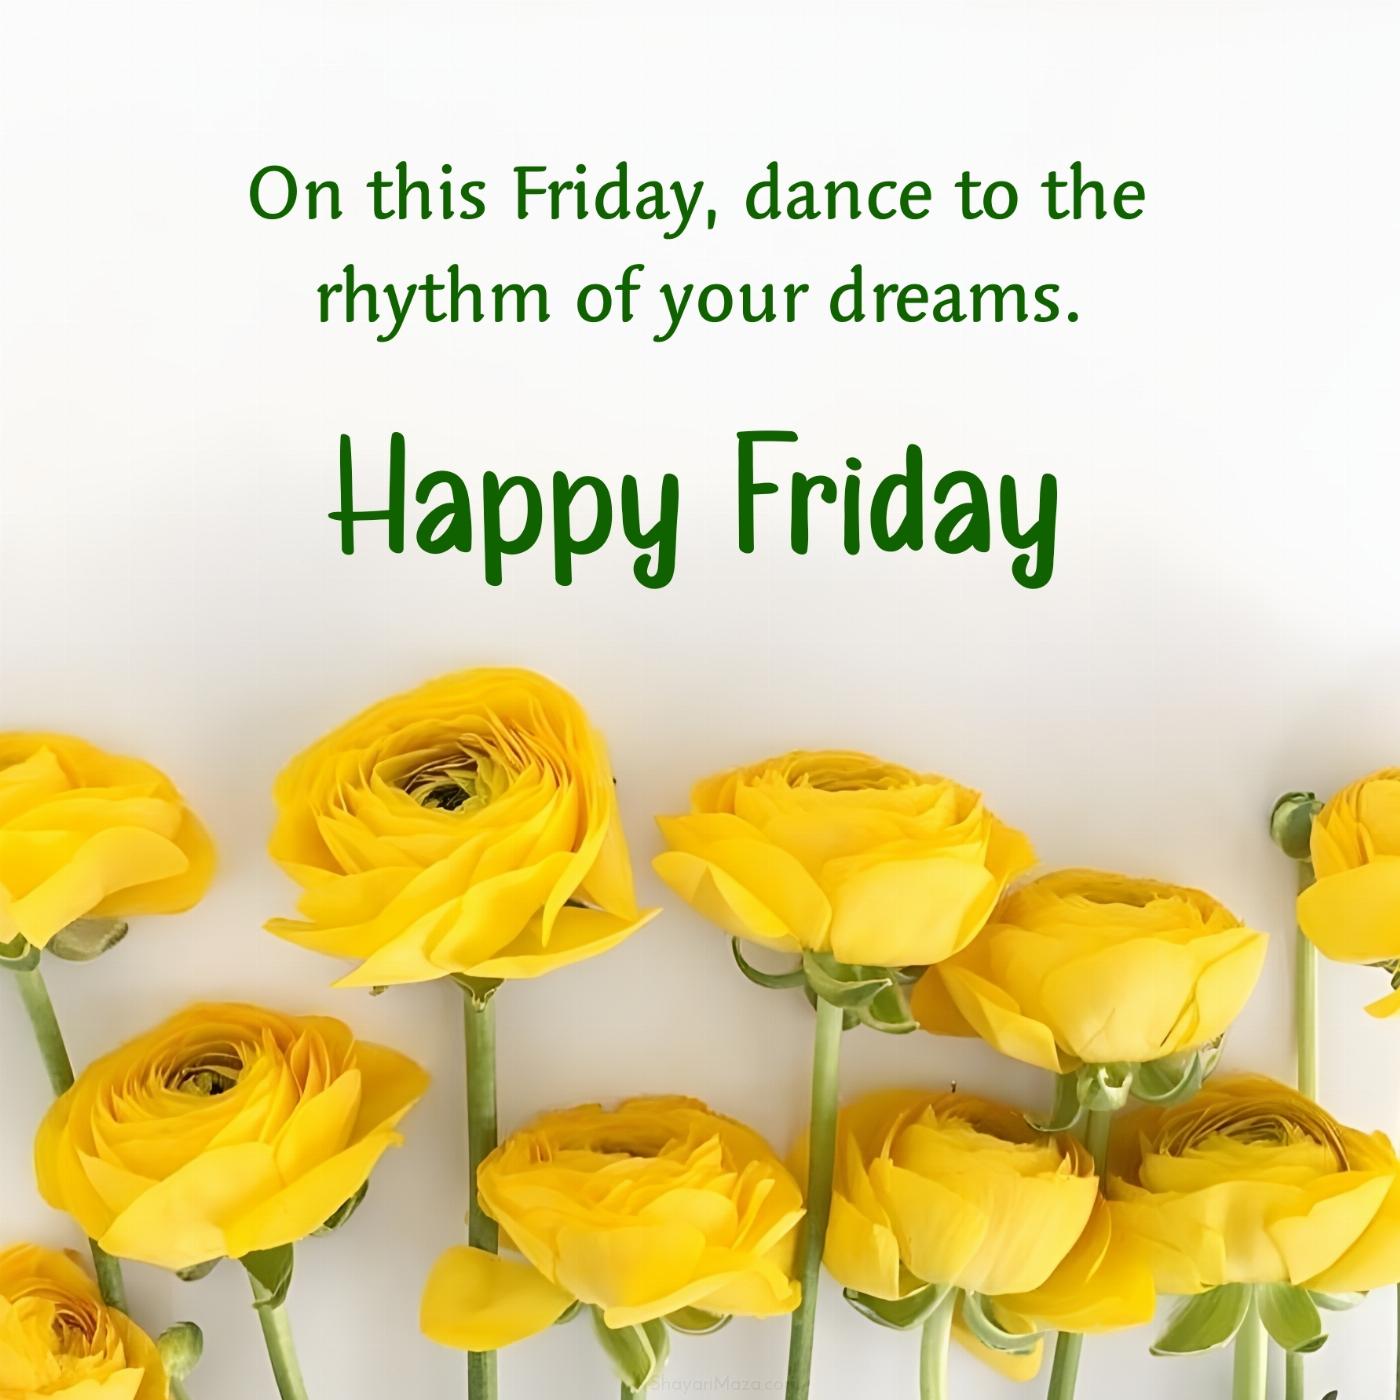 On this Friday dance to the rhythm of your dreams